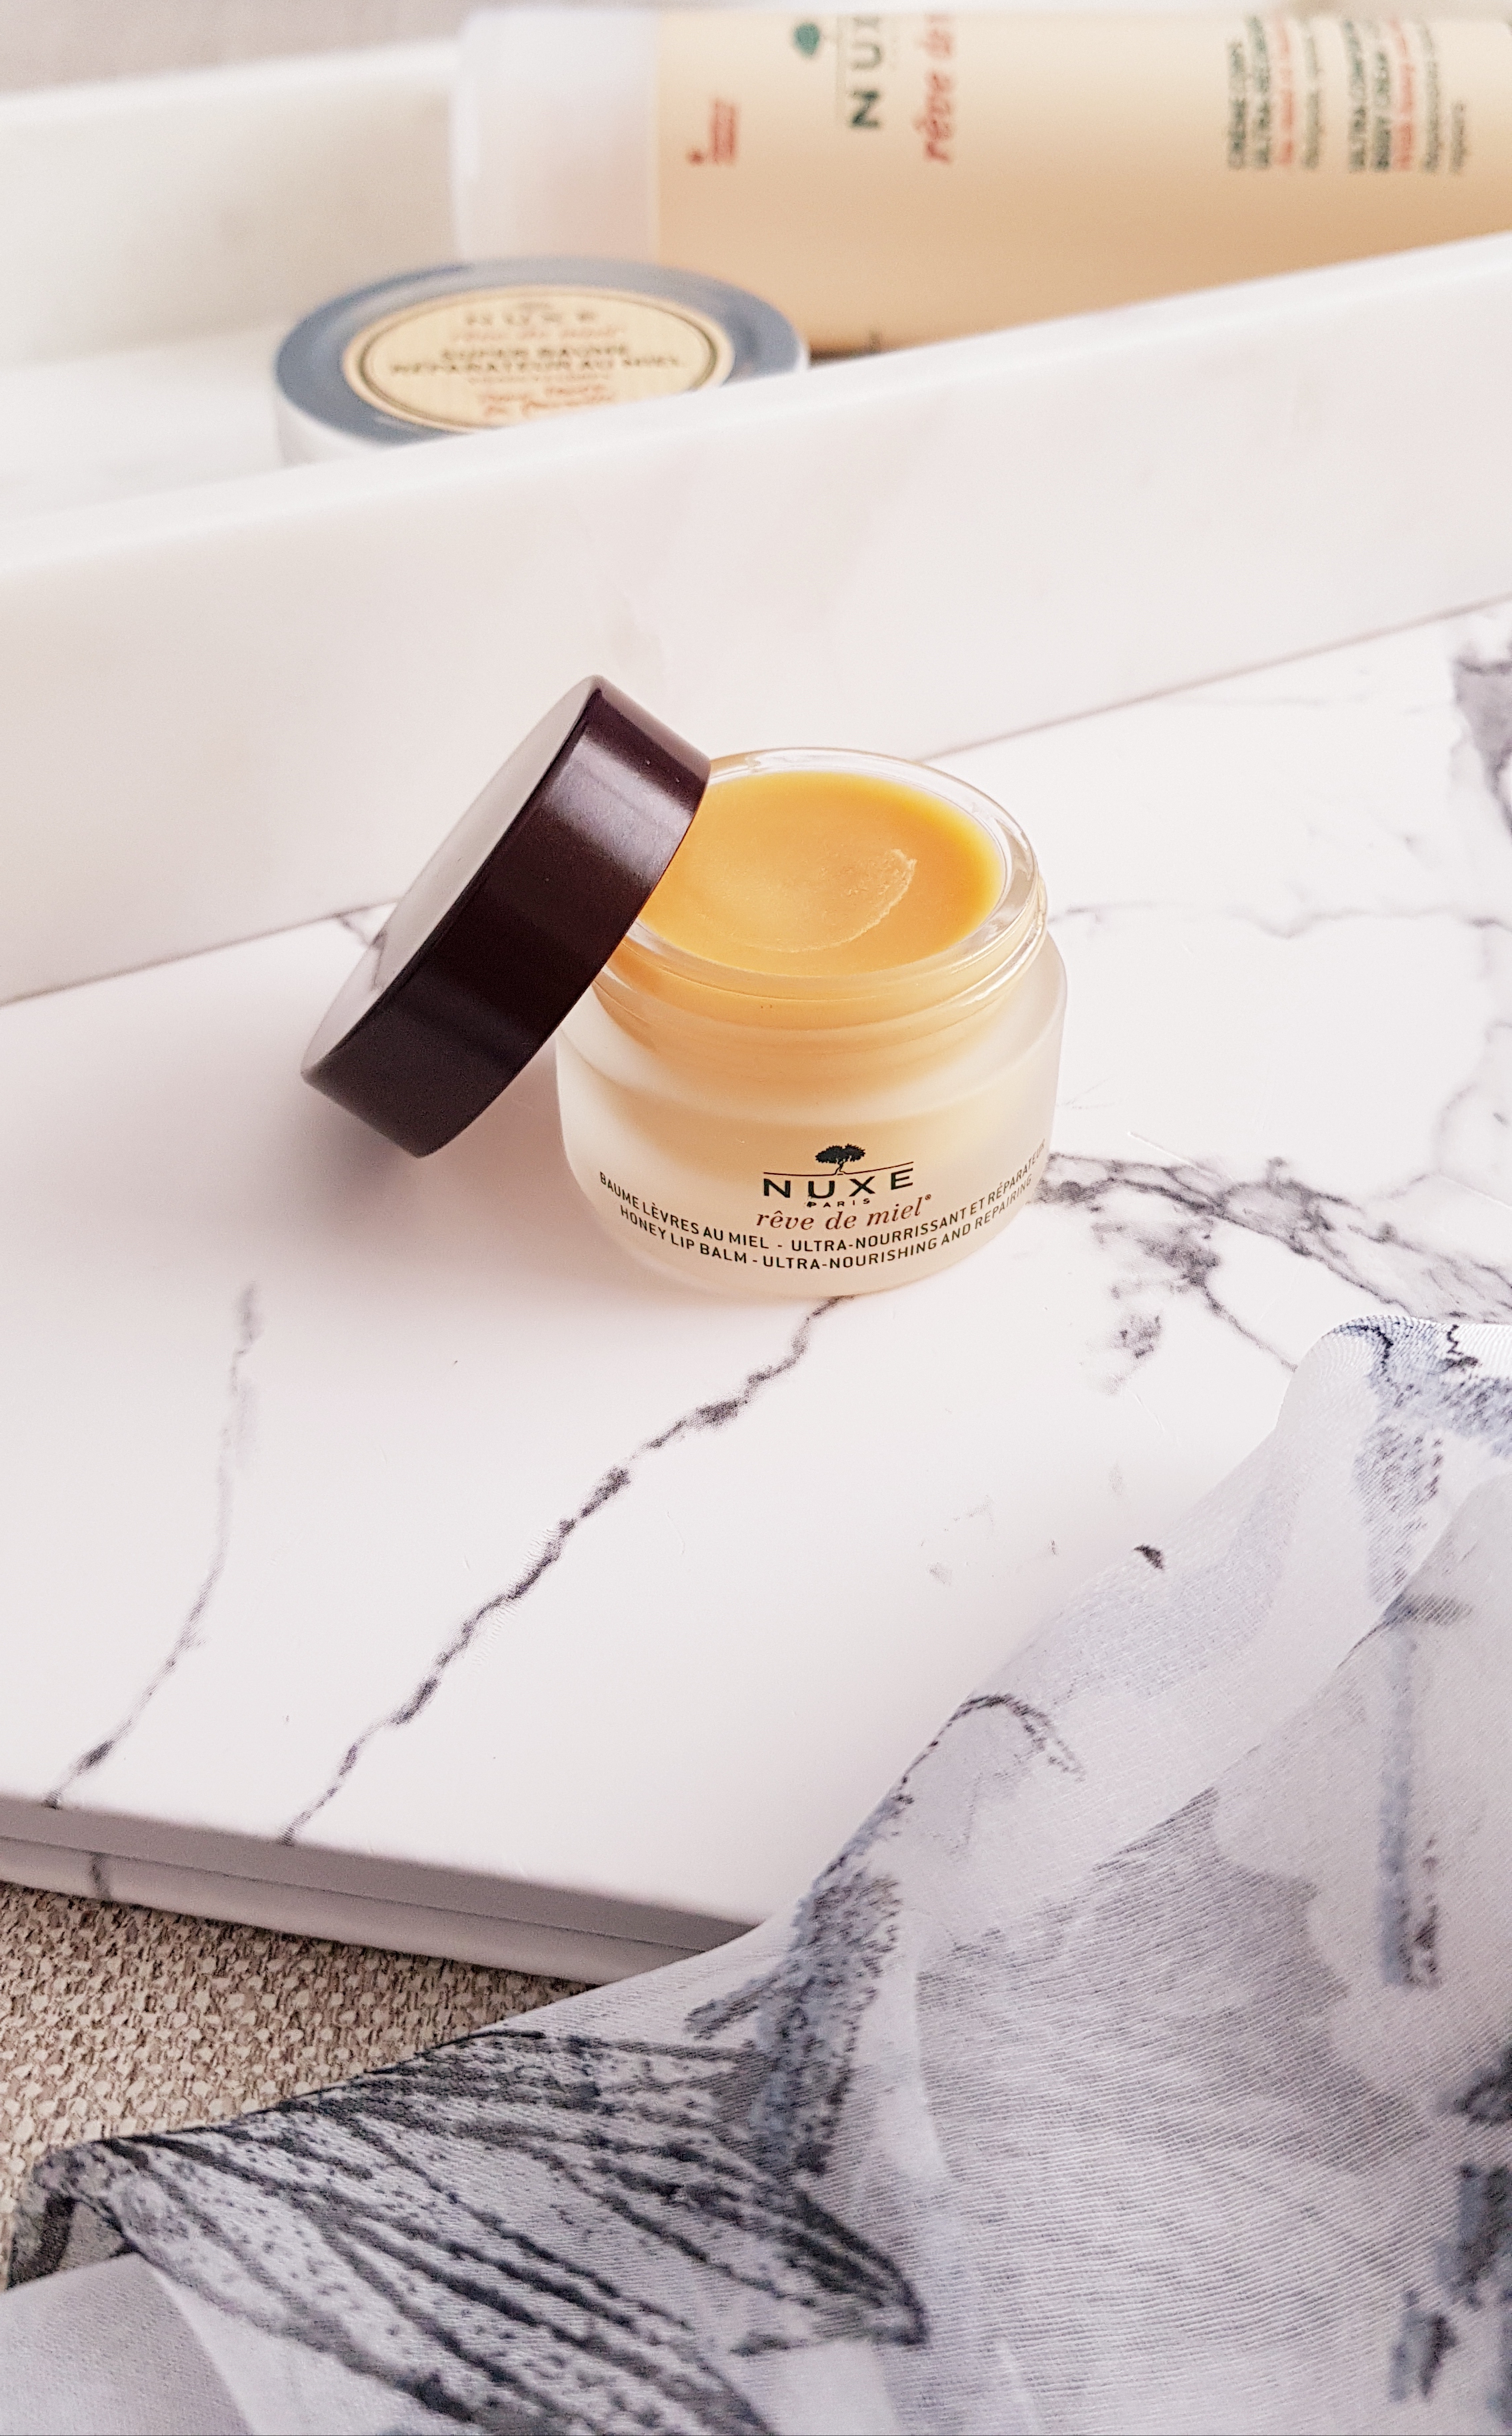 Nuxe lip balm with honey - New Launch [Ms Tantrum Blog]